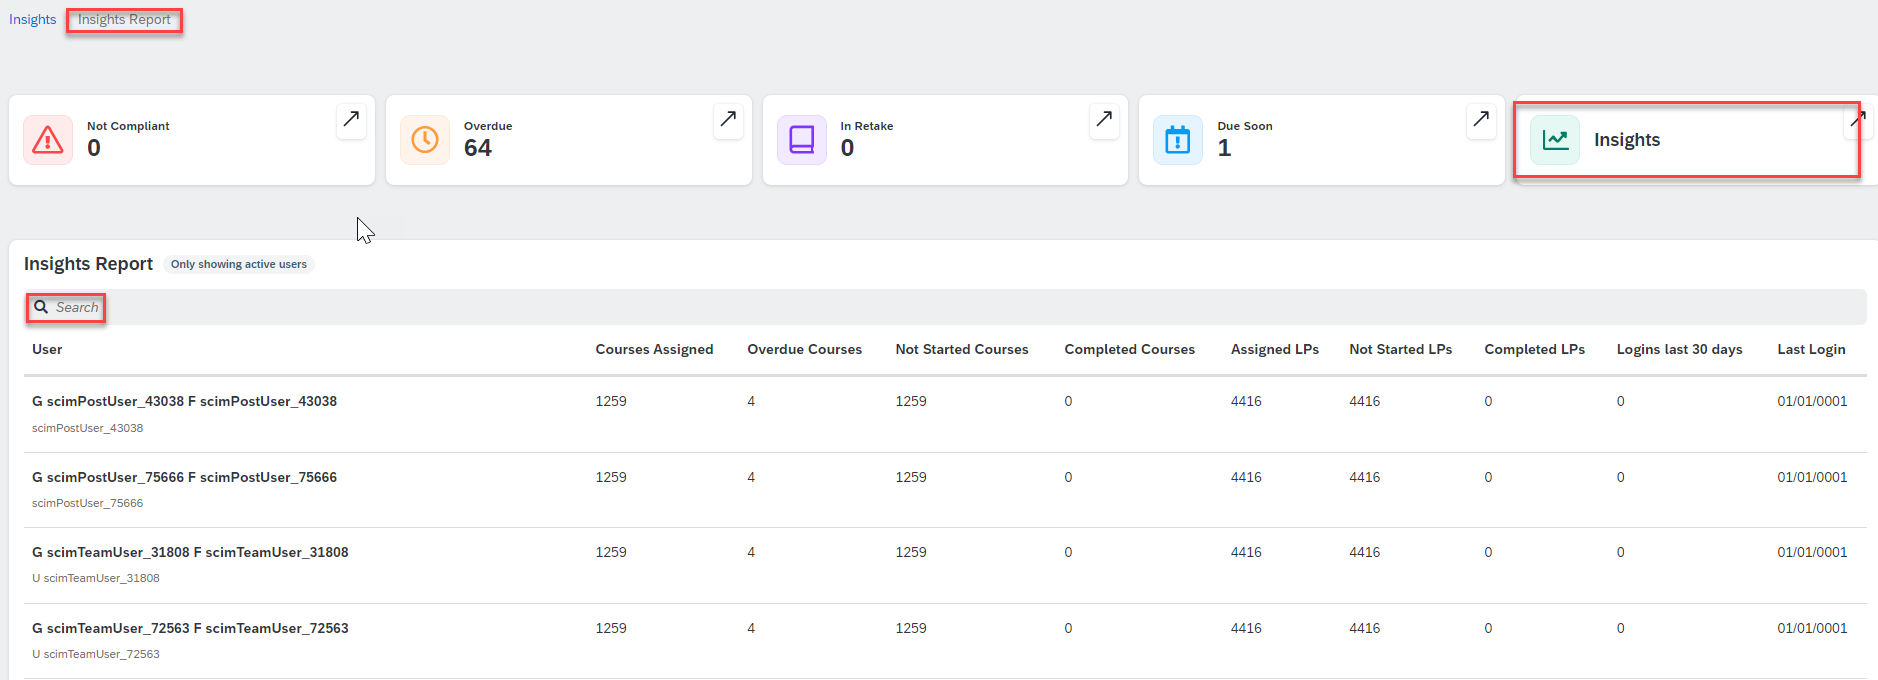 Manager View Insights report showing sample user data.